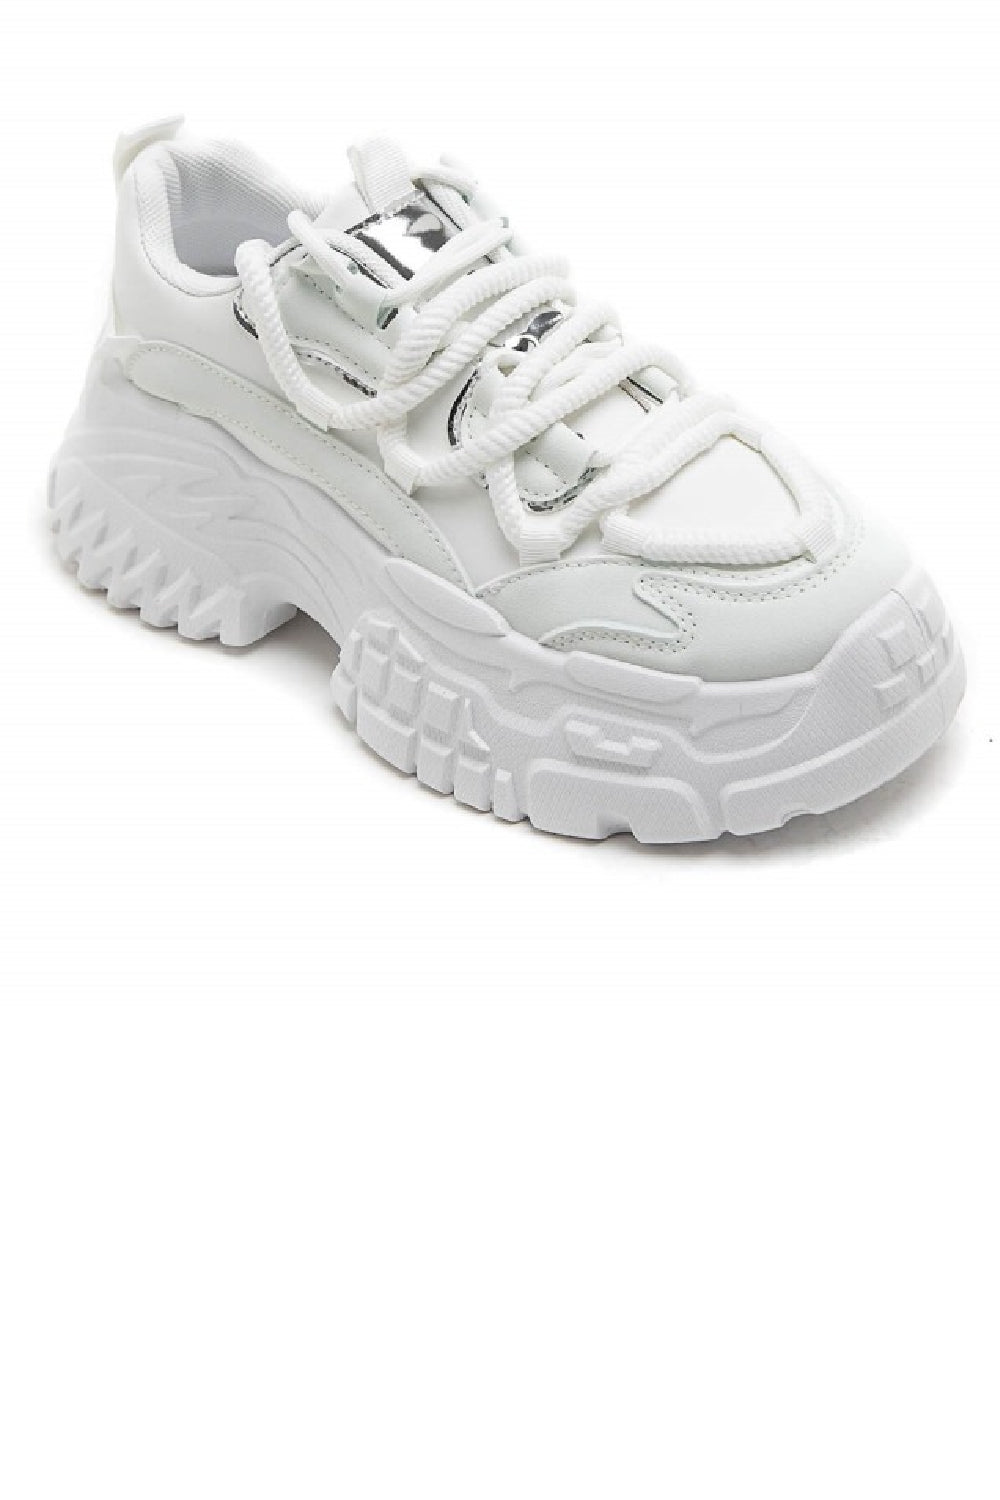 WHITE CHUNKY PLATFORM LACE UP SNEAKERS TRAINERS